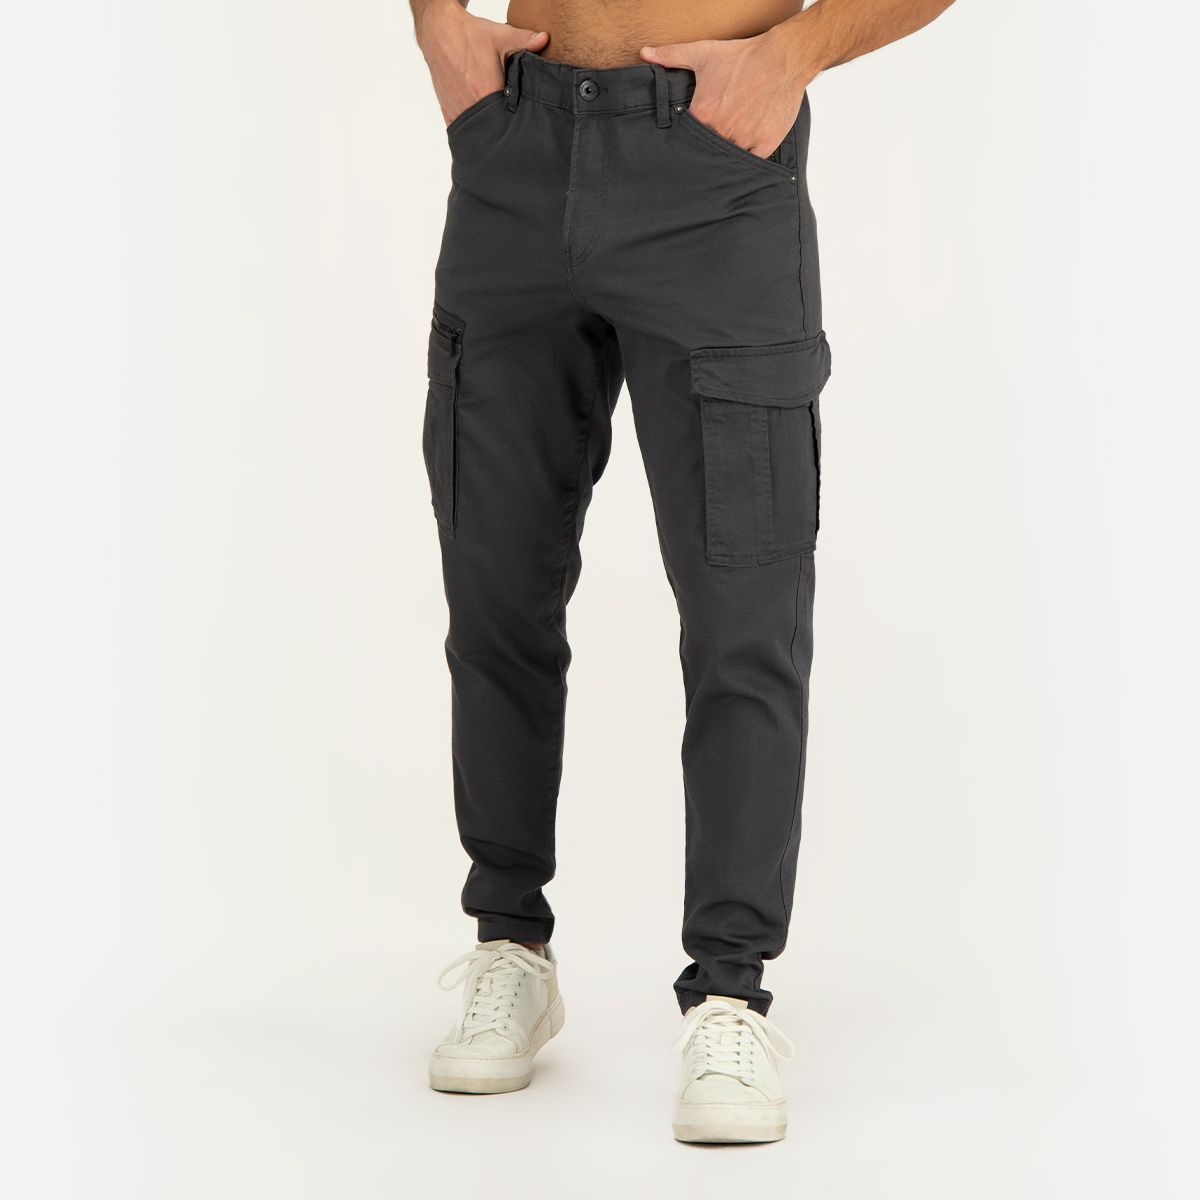 Buy Ace Dex Tapered AKM Cargo Trousers 32